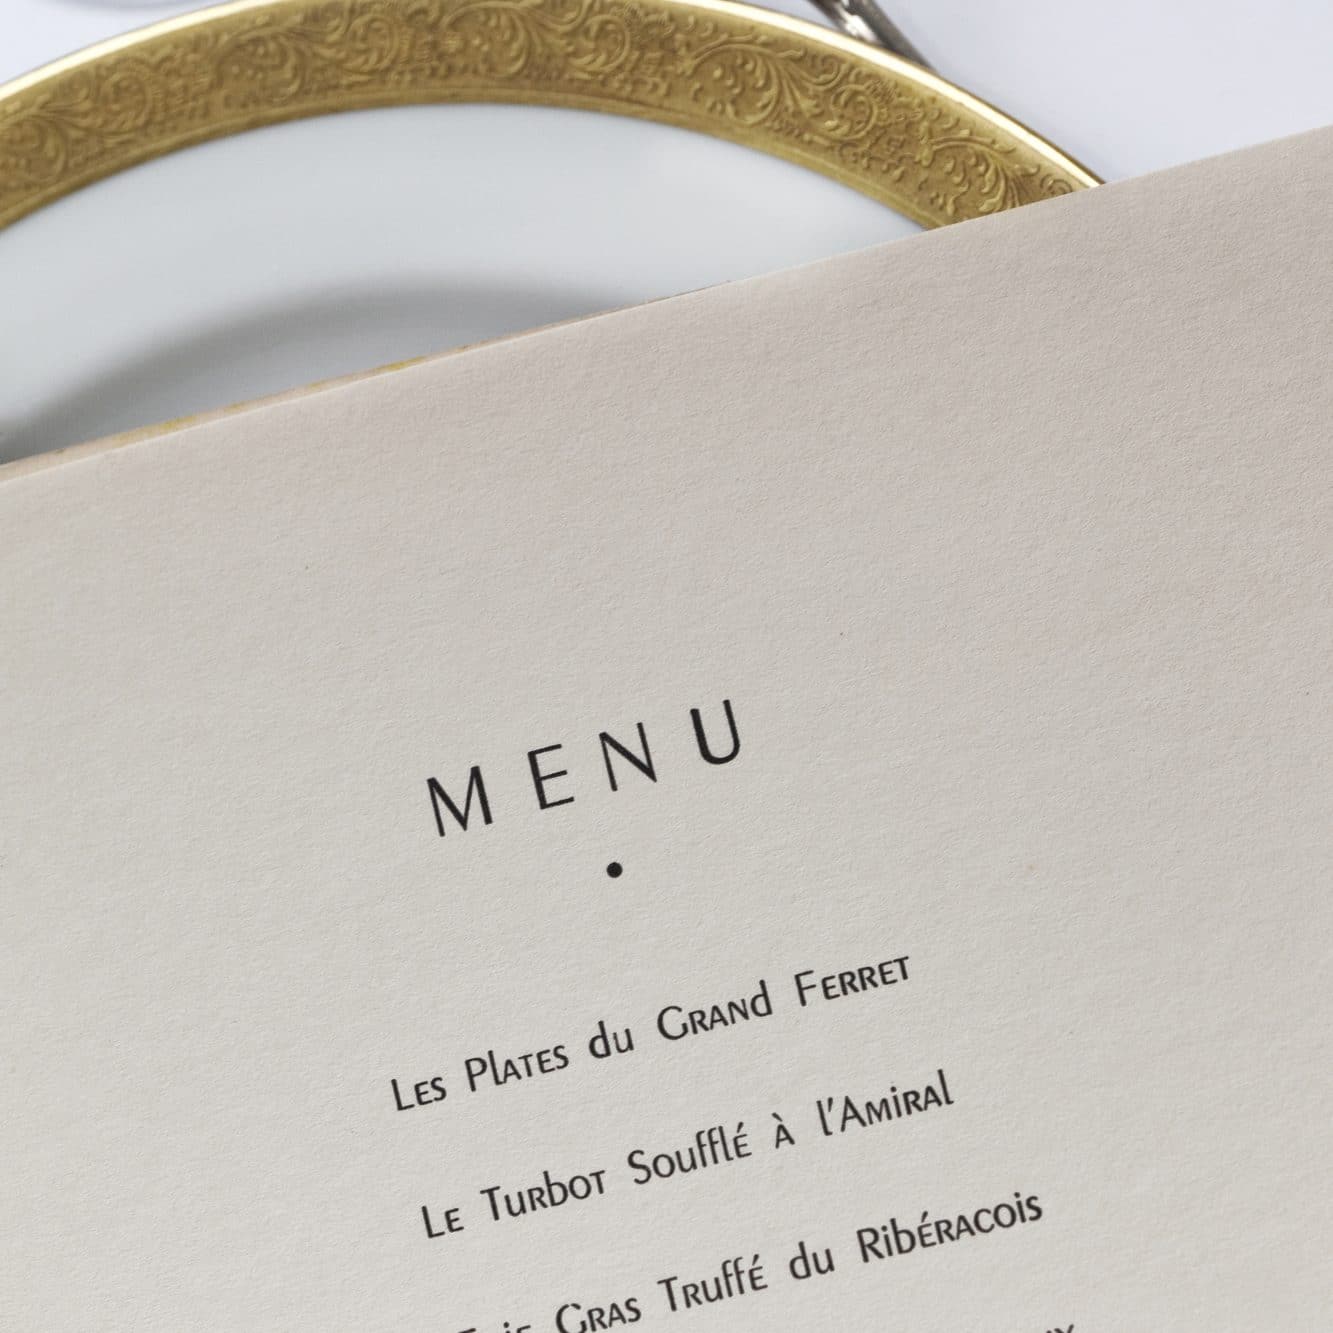 Details of a classic French menu in a luxury restaurant